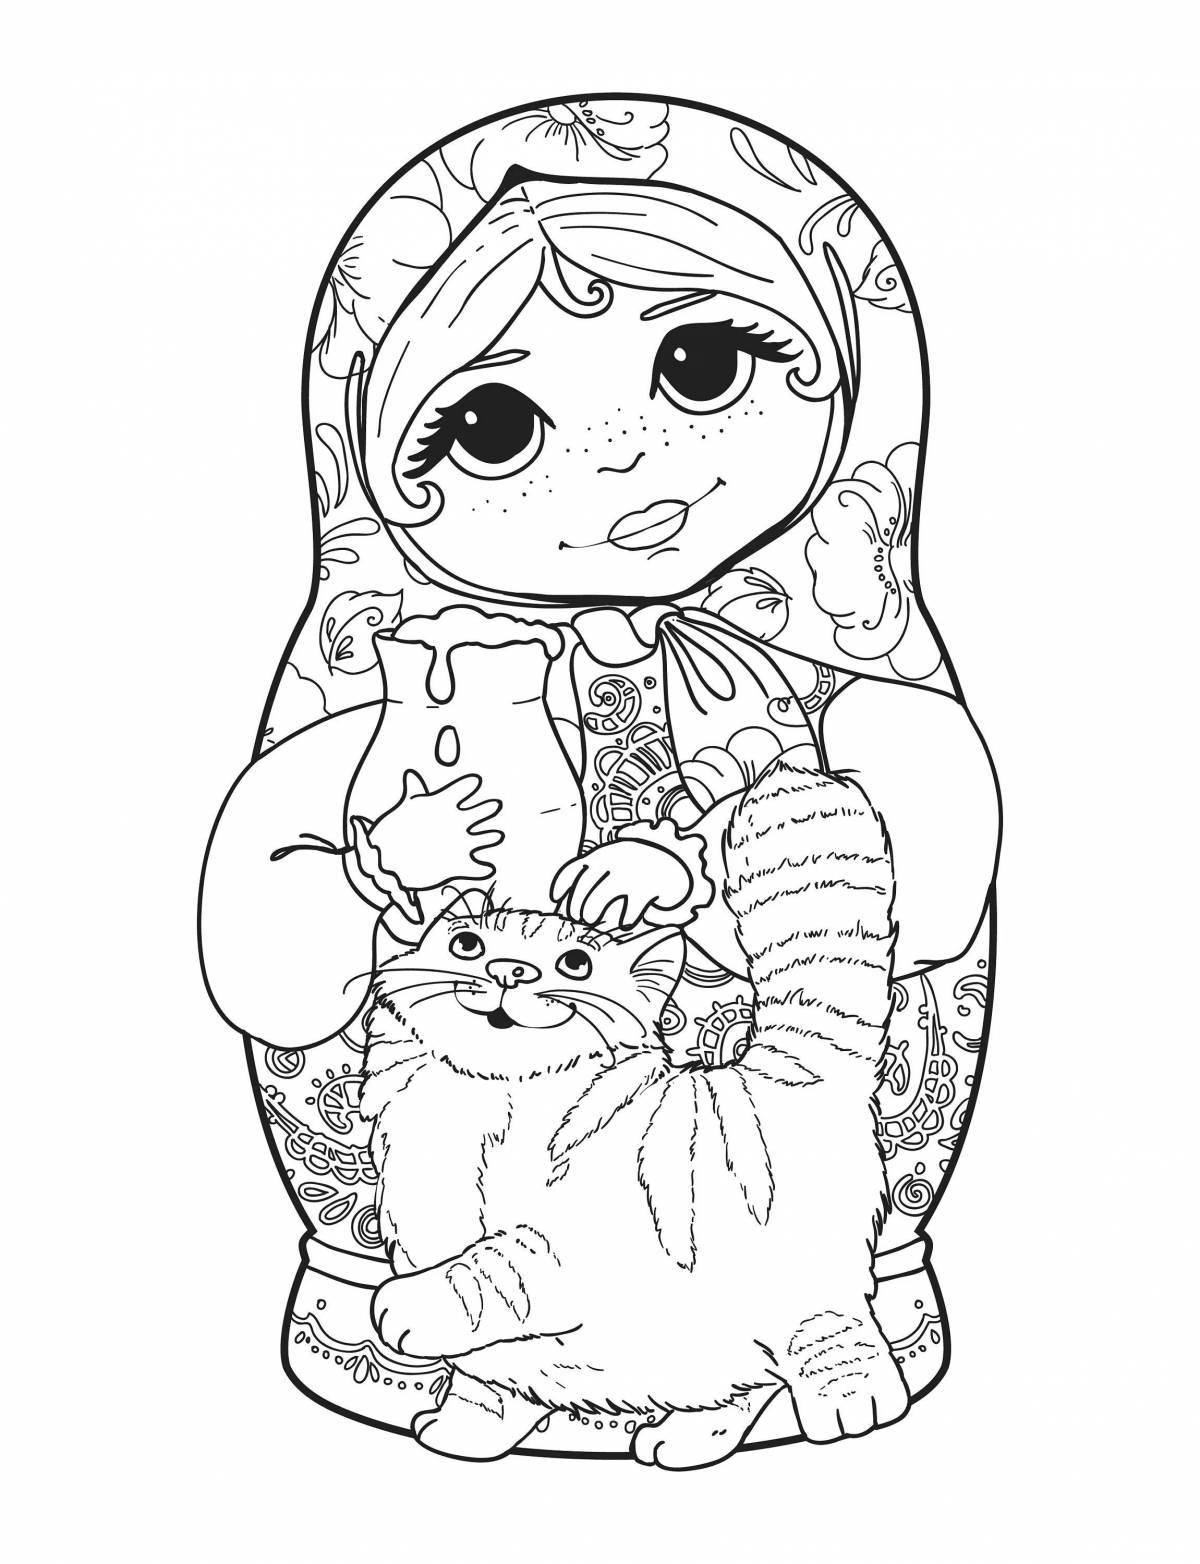 Gorgeous matryoshka coloring book for children 5-6 years old